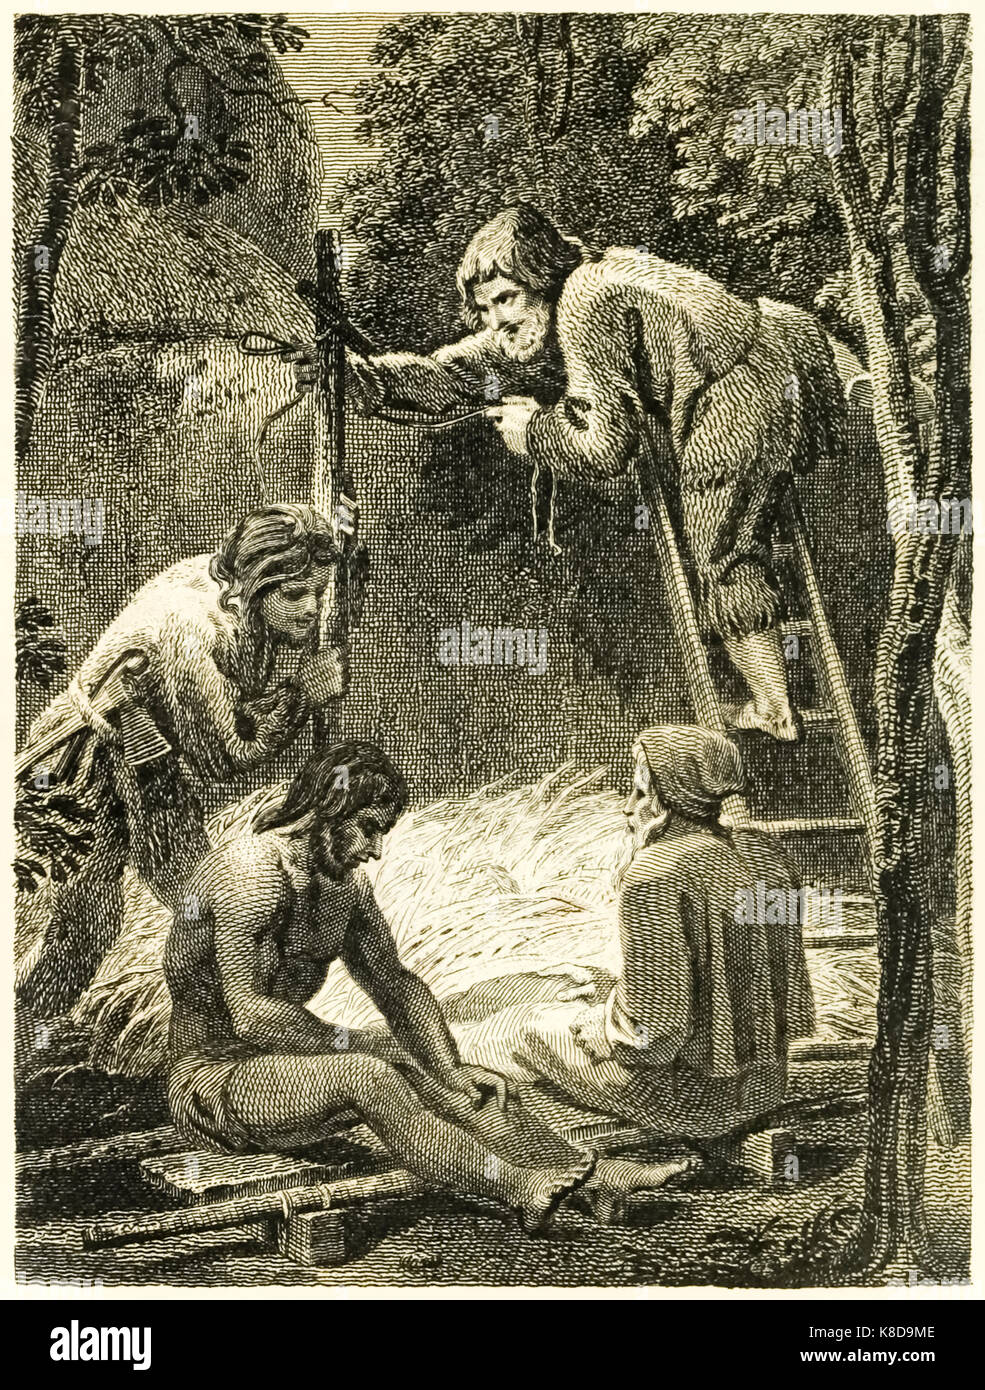 ‘Robinson Crusoe and Friday making a Tent to lodge Friday’s Father and the Spaniard’ from “The Life and Strange Surprising Adventures of Robinson Crusoe, or York, Mariner” by Daniel Defoe (1660-1731). Illustration by Thomas Stothard (1755-1834) engraving by Thomas Medland (1765-1833). See more information below Stock Photo